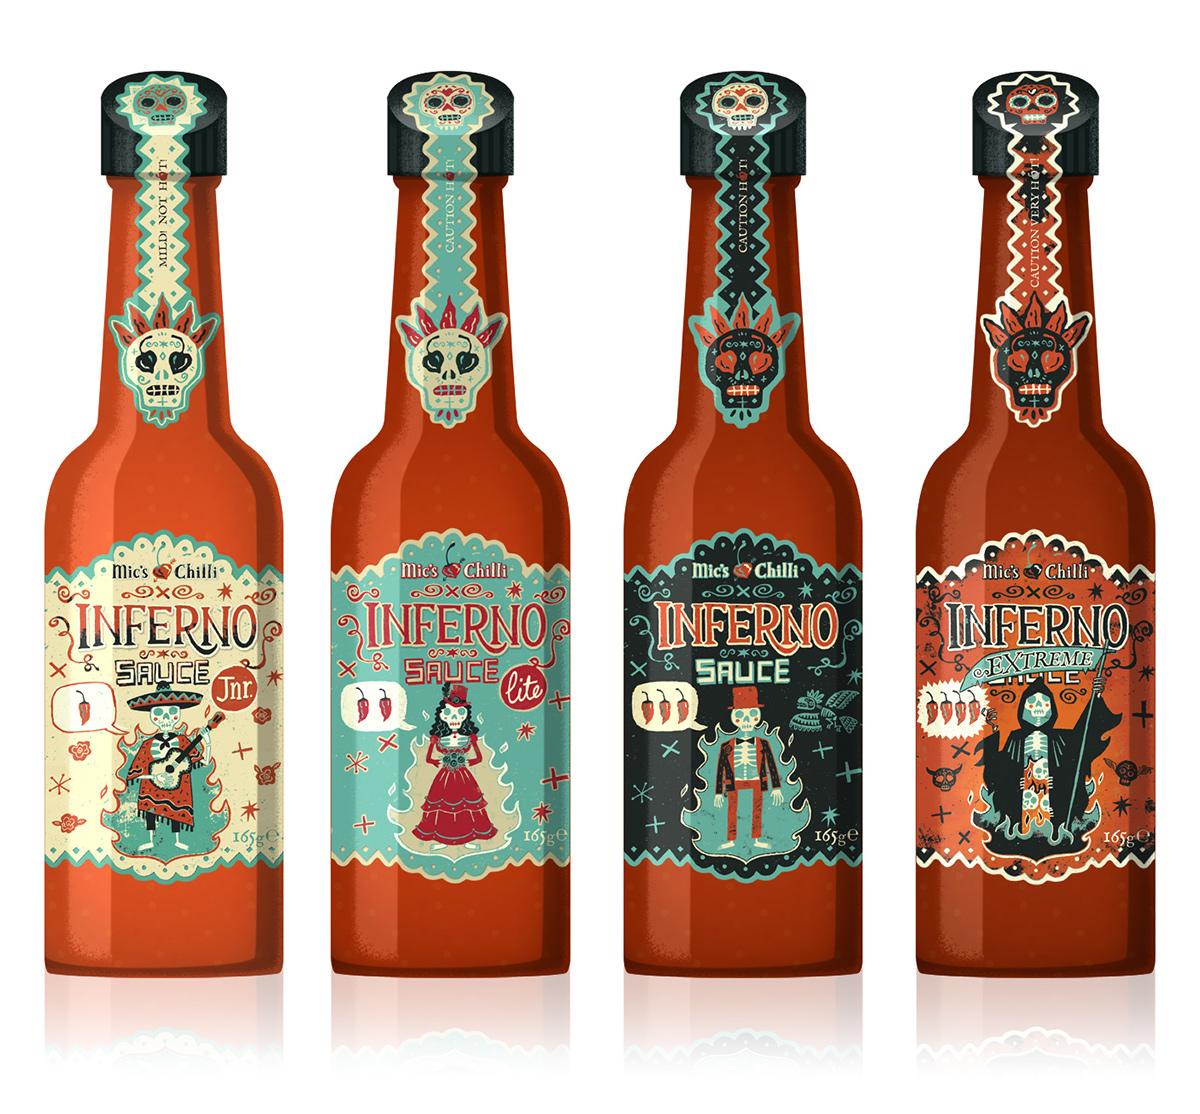 skeletons sauce bride groom folk art labels day of the dead skulls Mexican south american Retro limited palette Chilli award winning